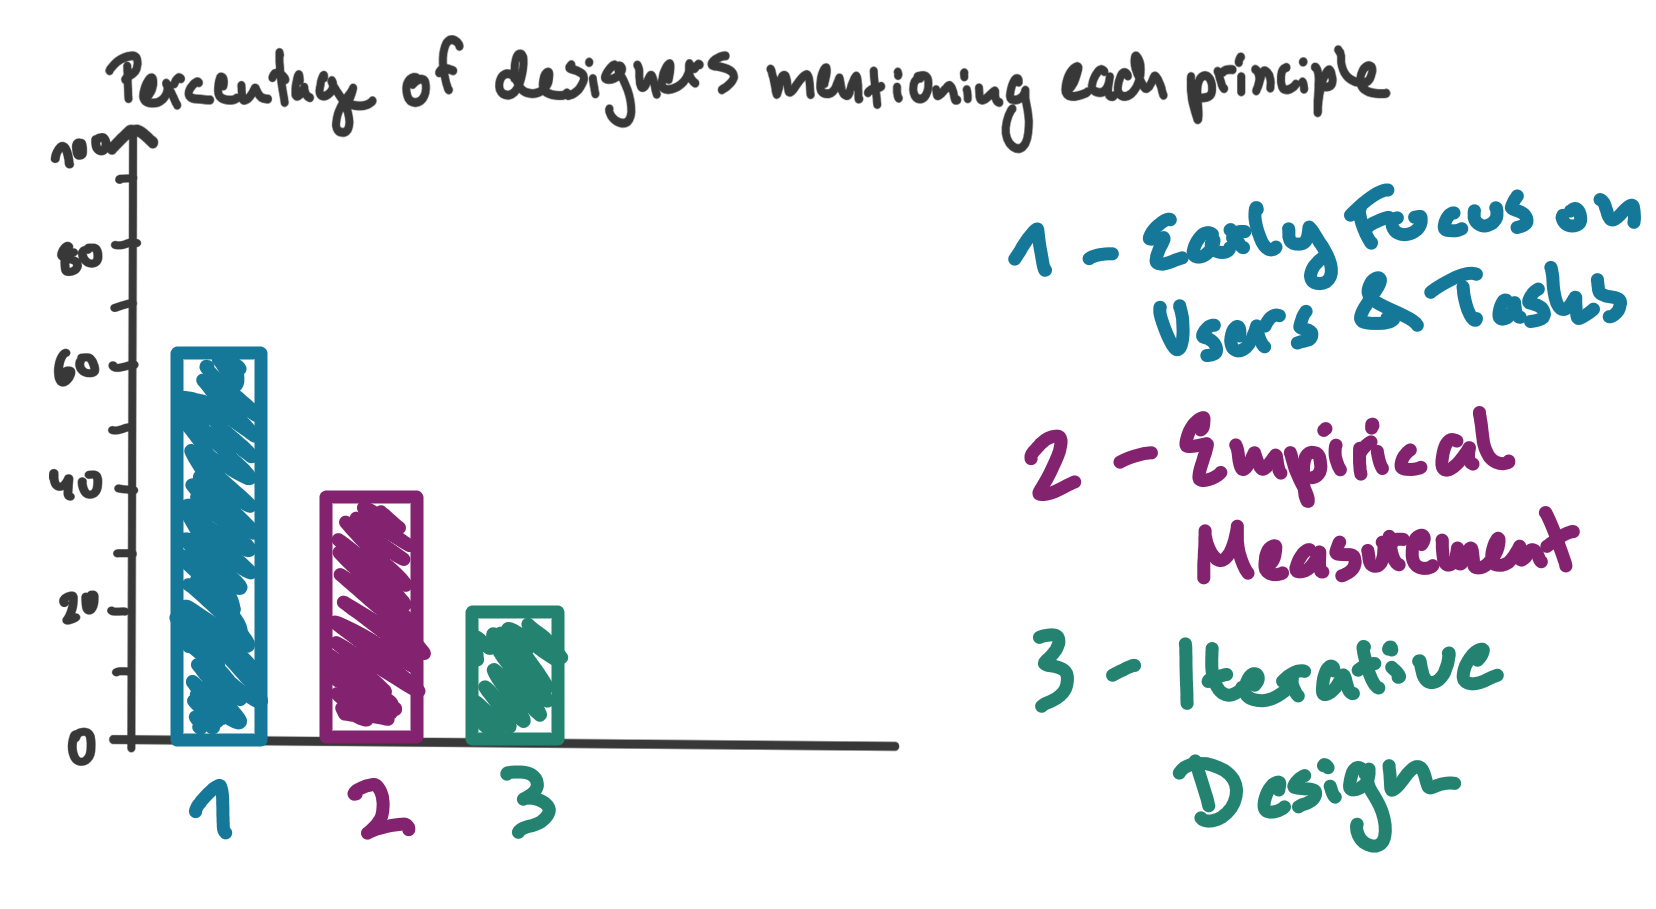 Sketched chart showing how many people mention each principle in their design approach: 62% mention Principle 1, 40% mention Principle 2, 20% mention Principle 3